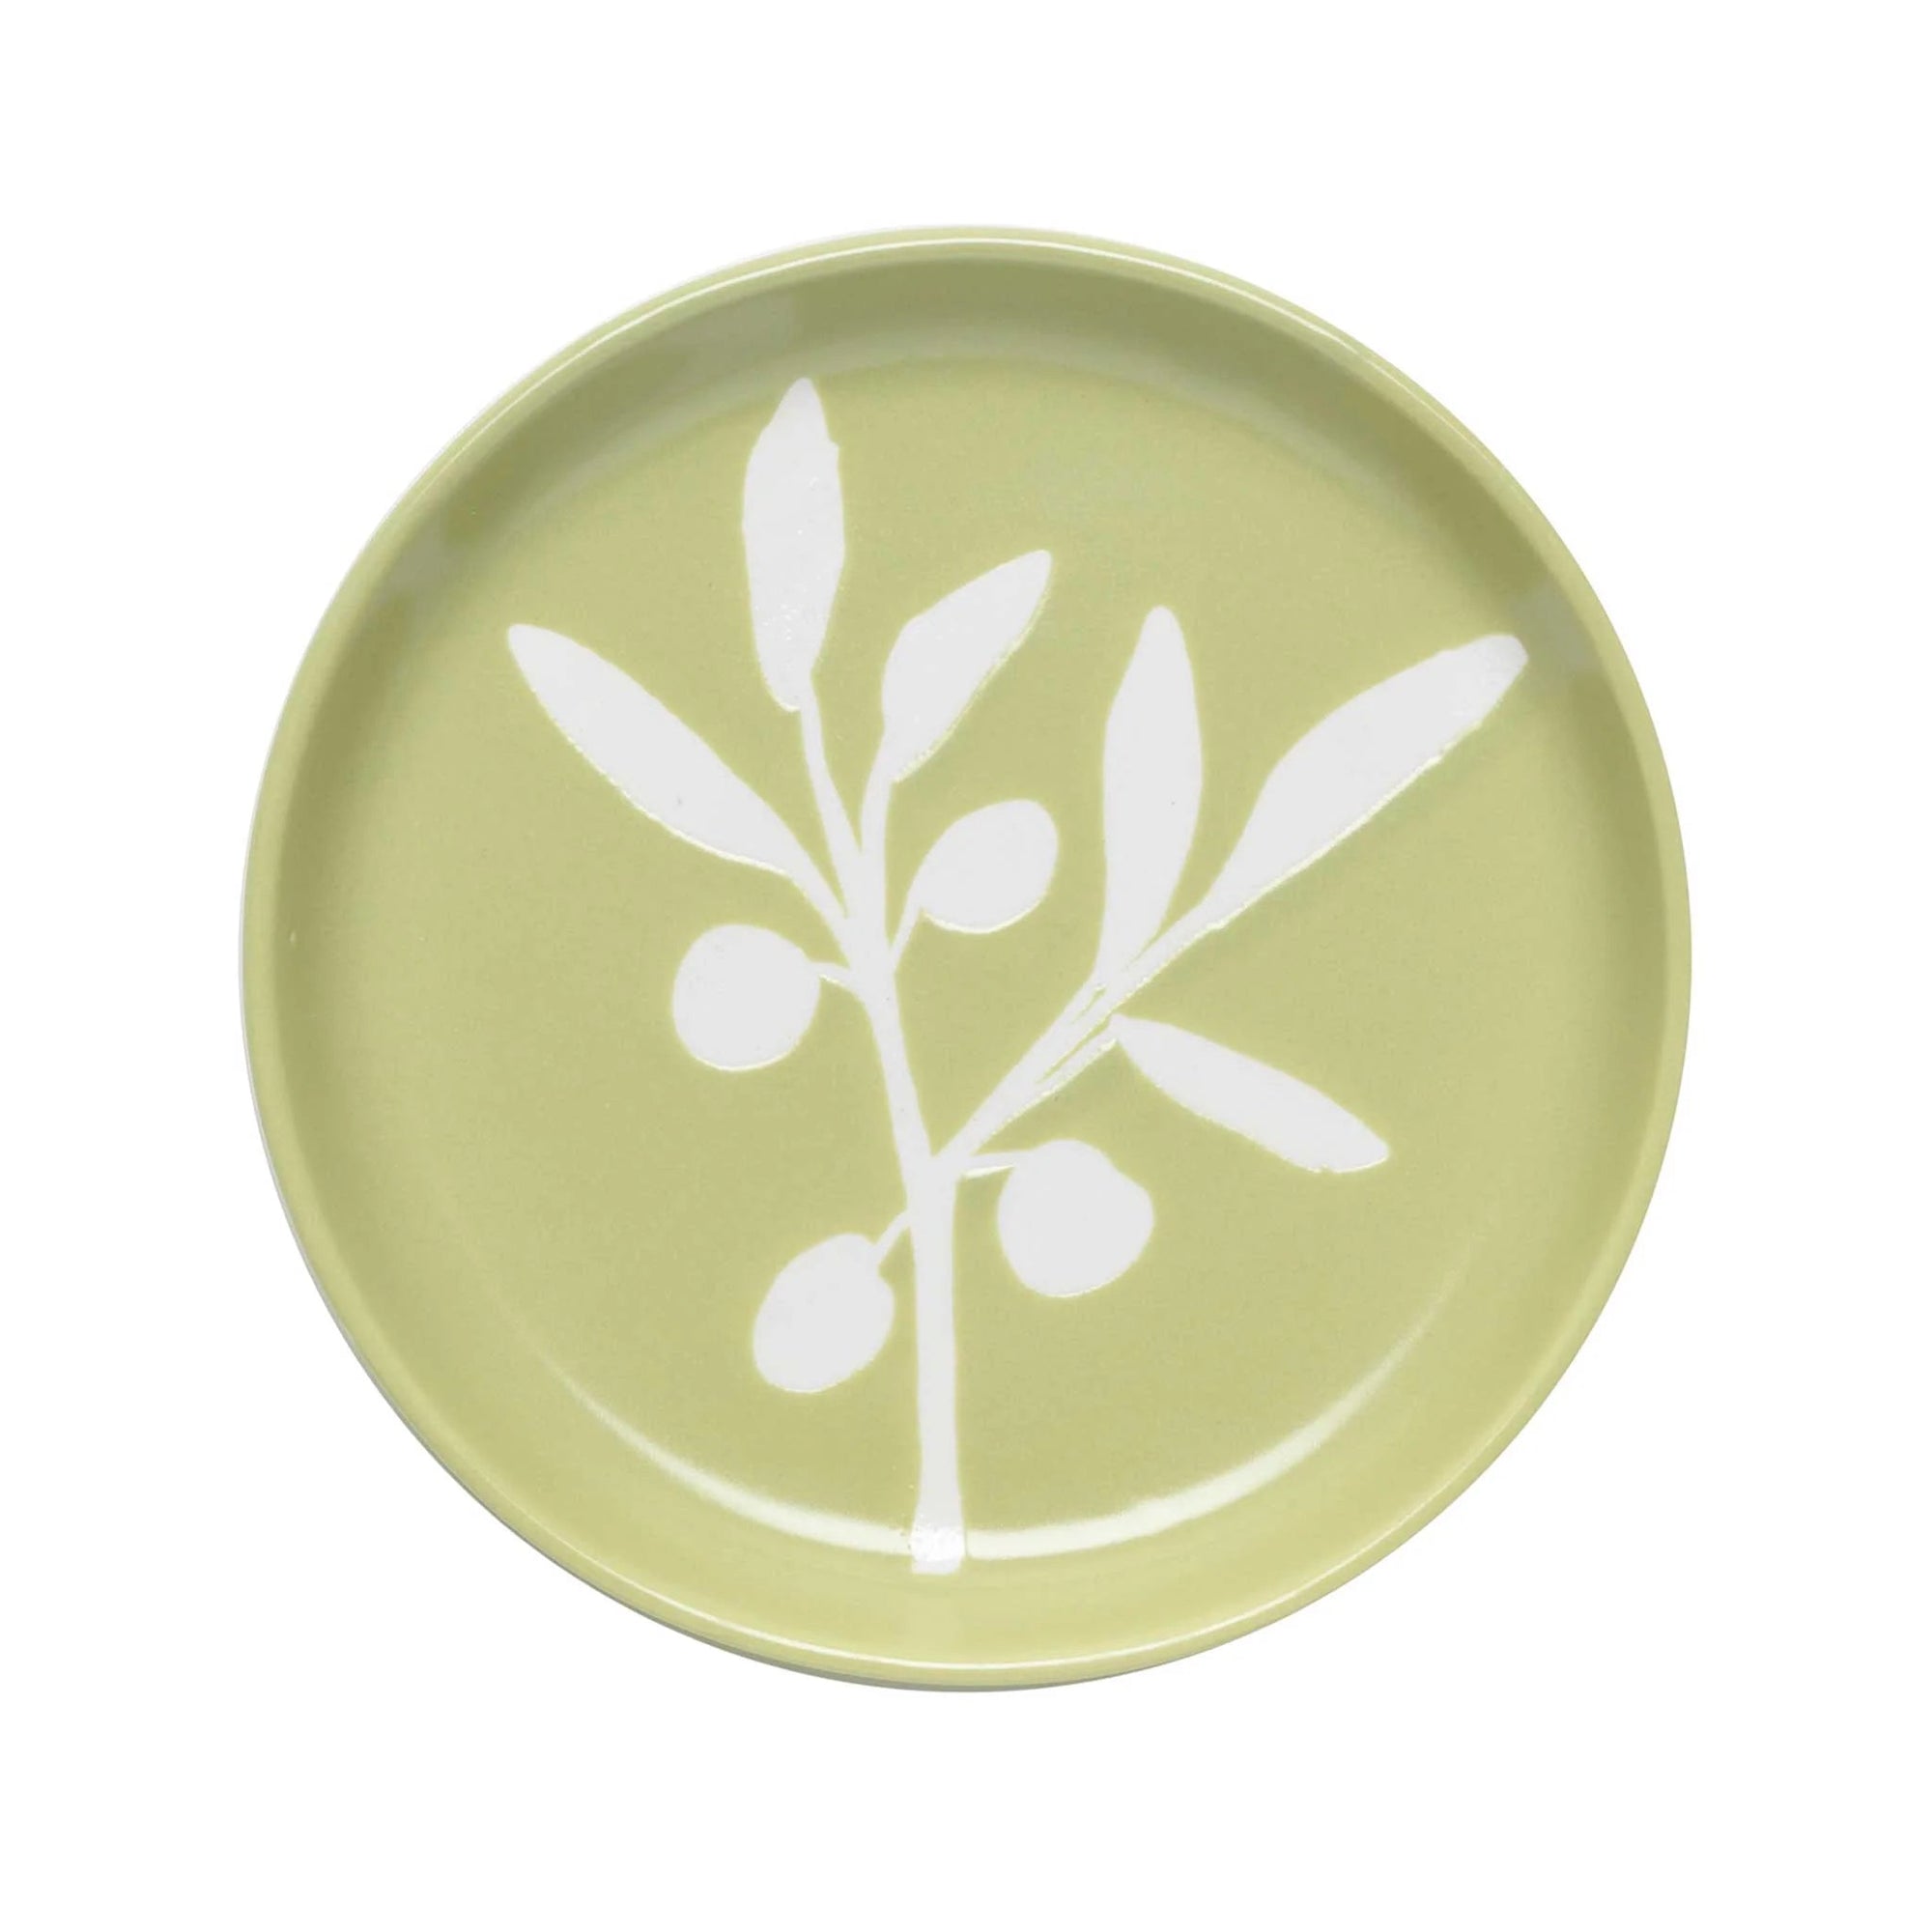 CUPPA COLOR COASTER - OLIVE BRANCH-Coasters-LIVING GOODS BY ORE-Coriander